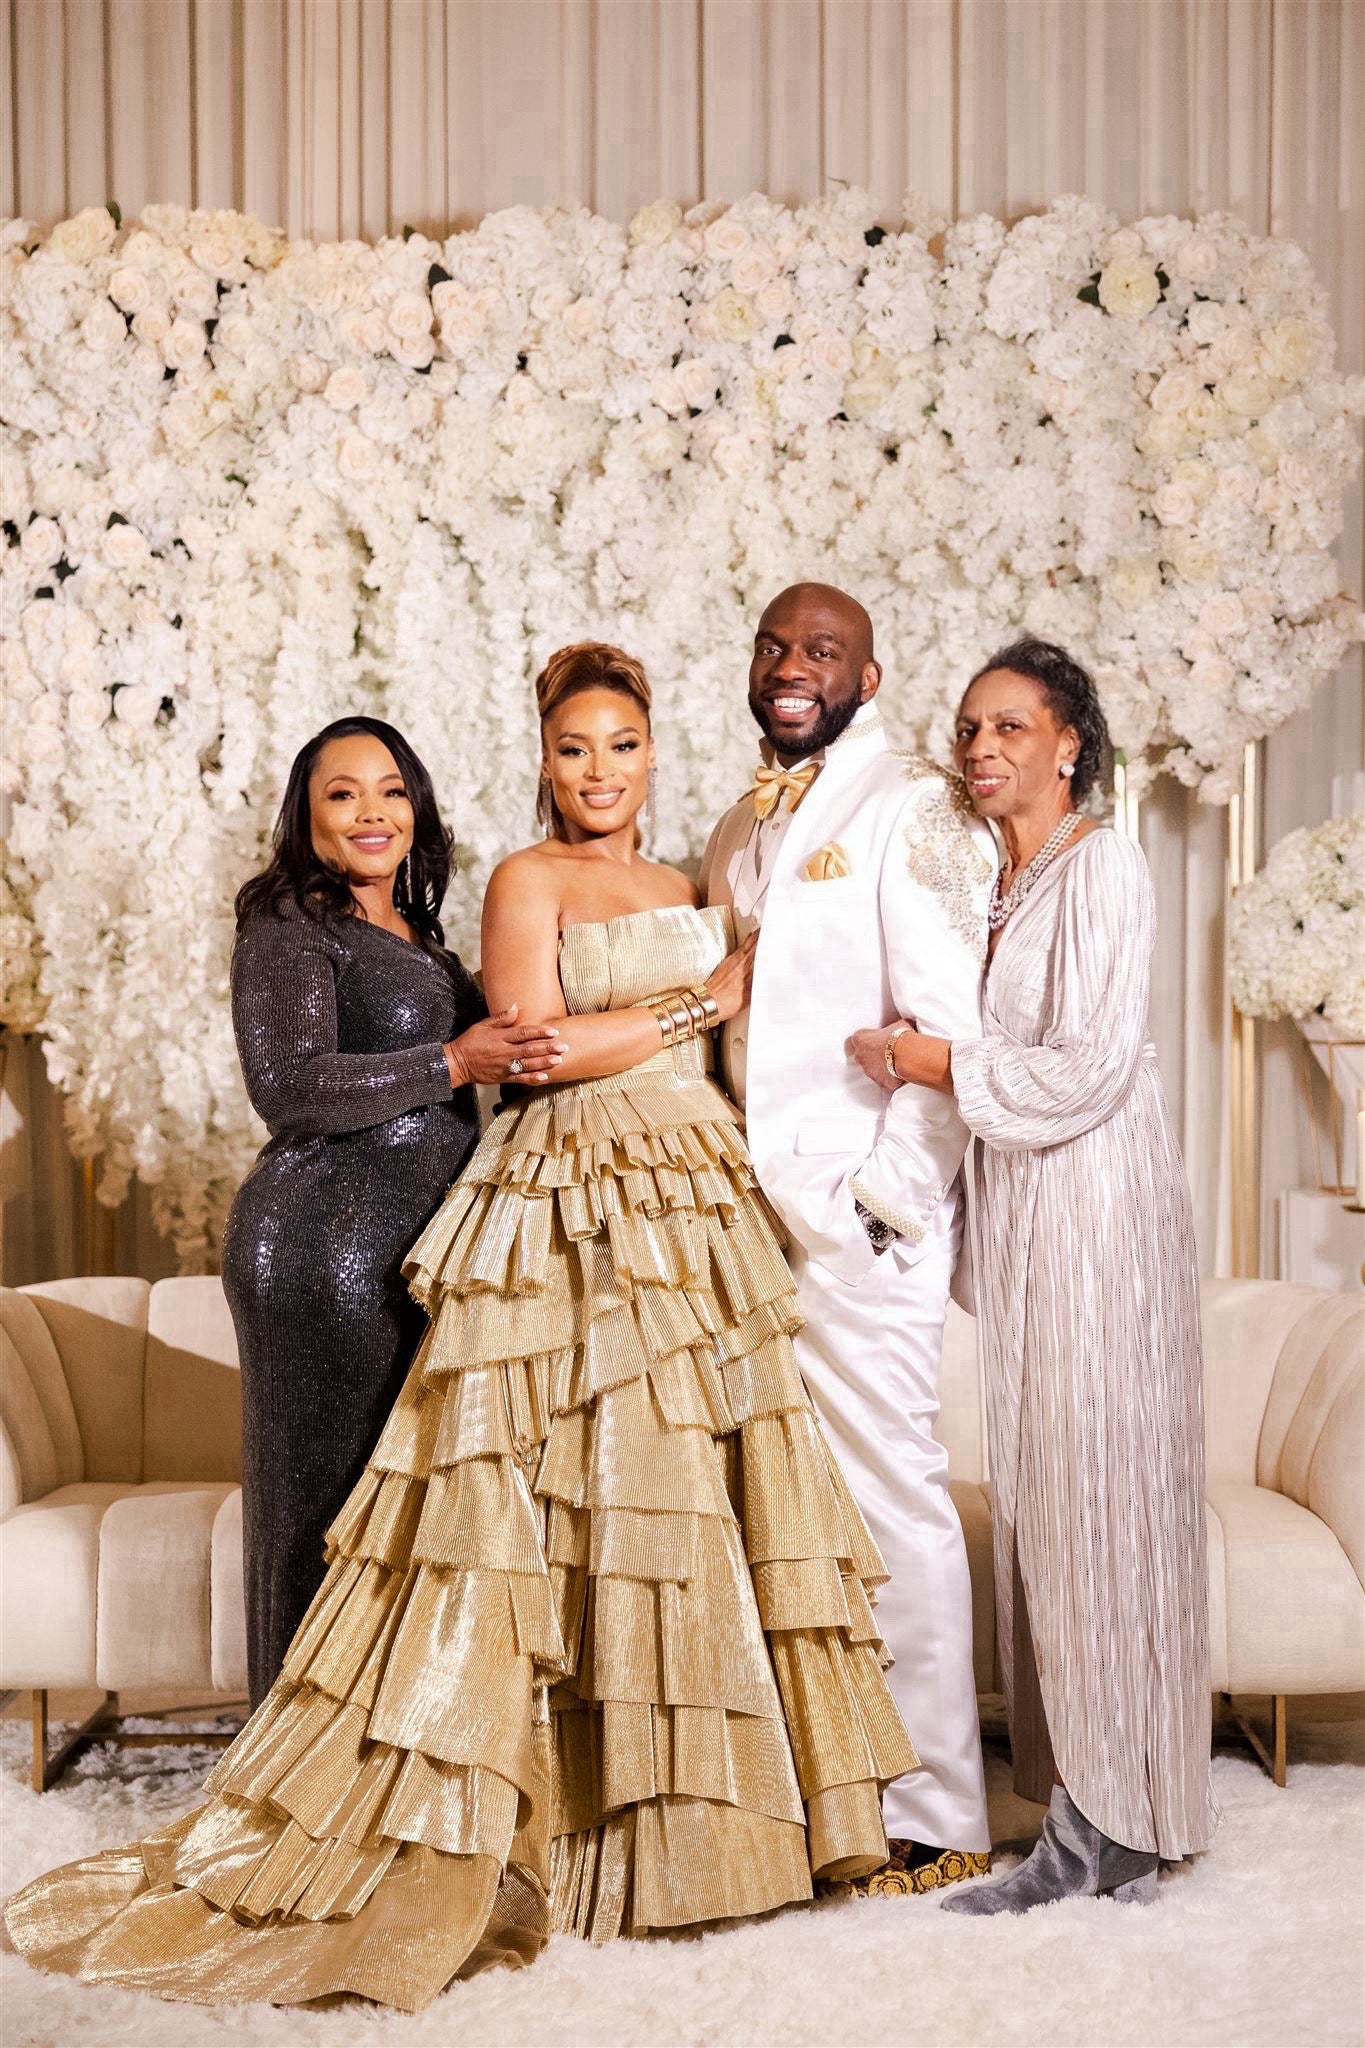 Bridal Bliss: Inside Director Crystle Roberson And Actor Omar Dorsey's Star-Studded New Year's Eve Celebration In LA